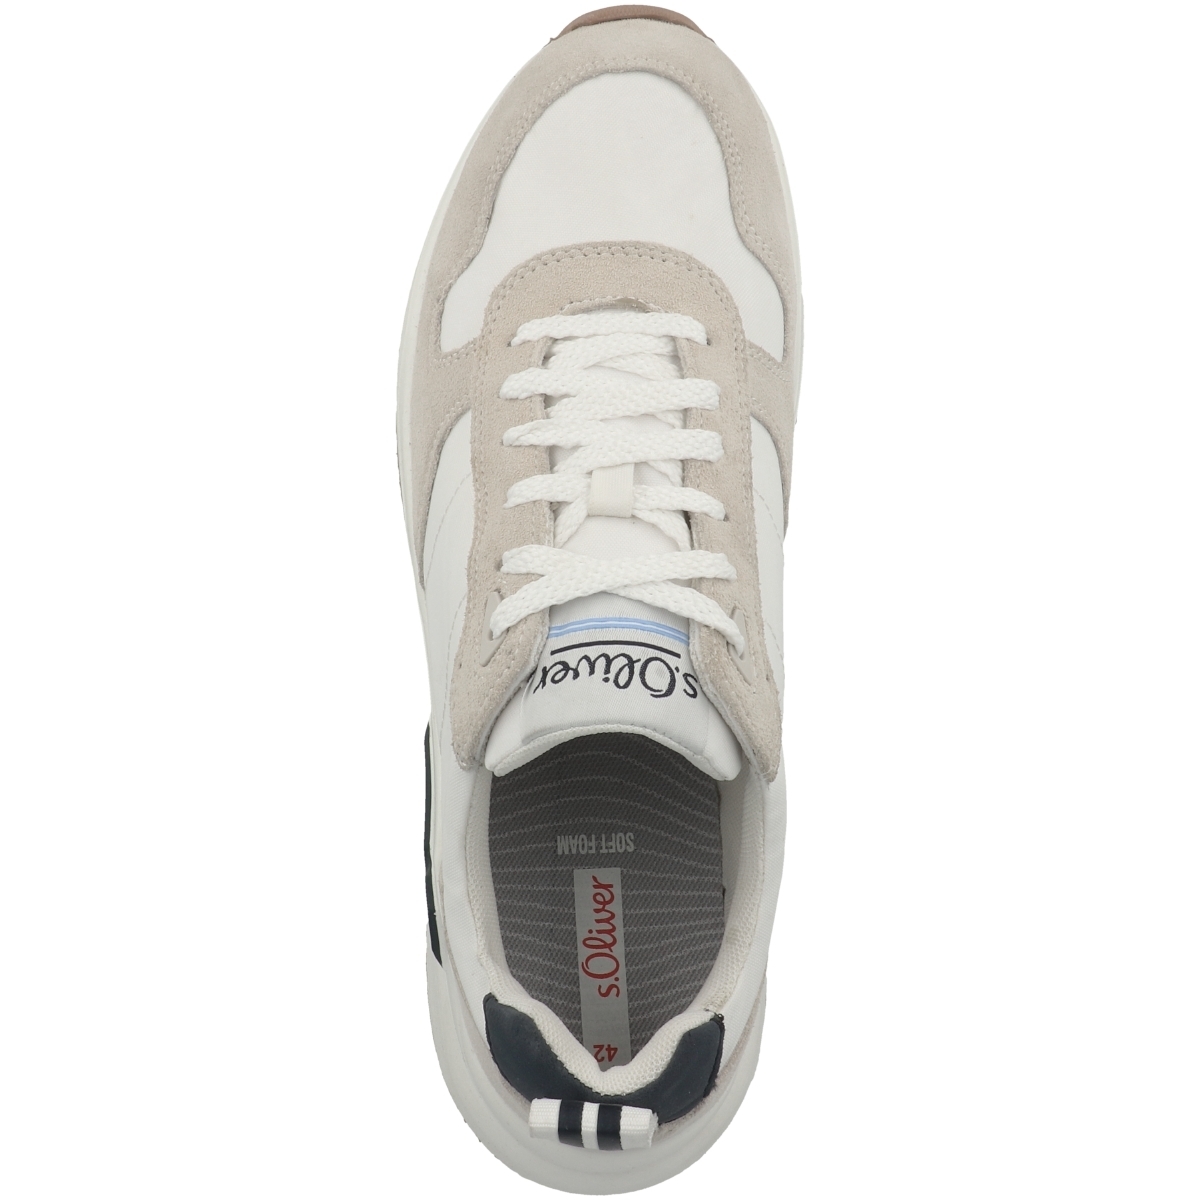 s.Oliver 5-13614-38 Sneaker weiss